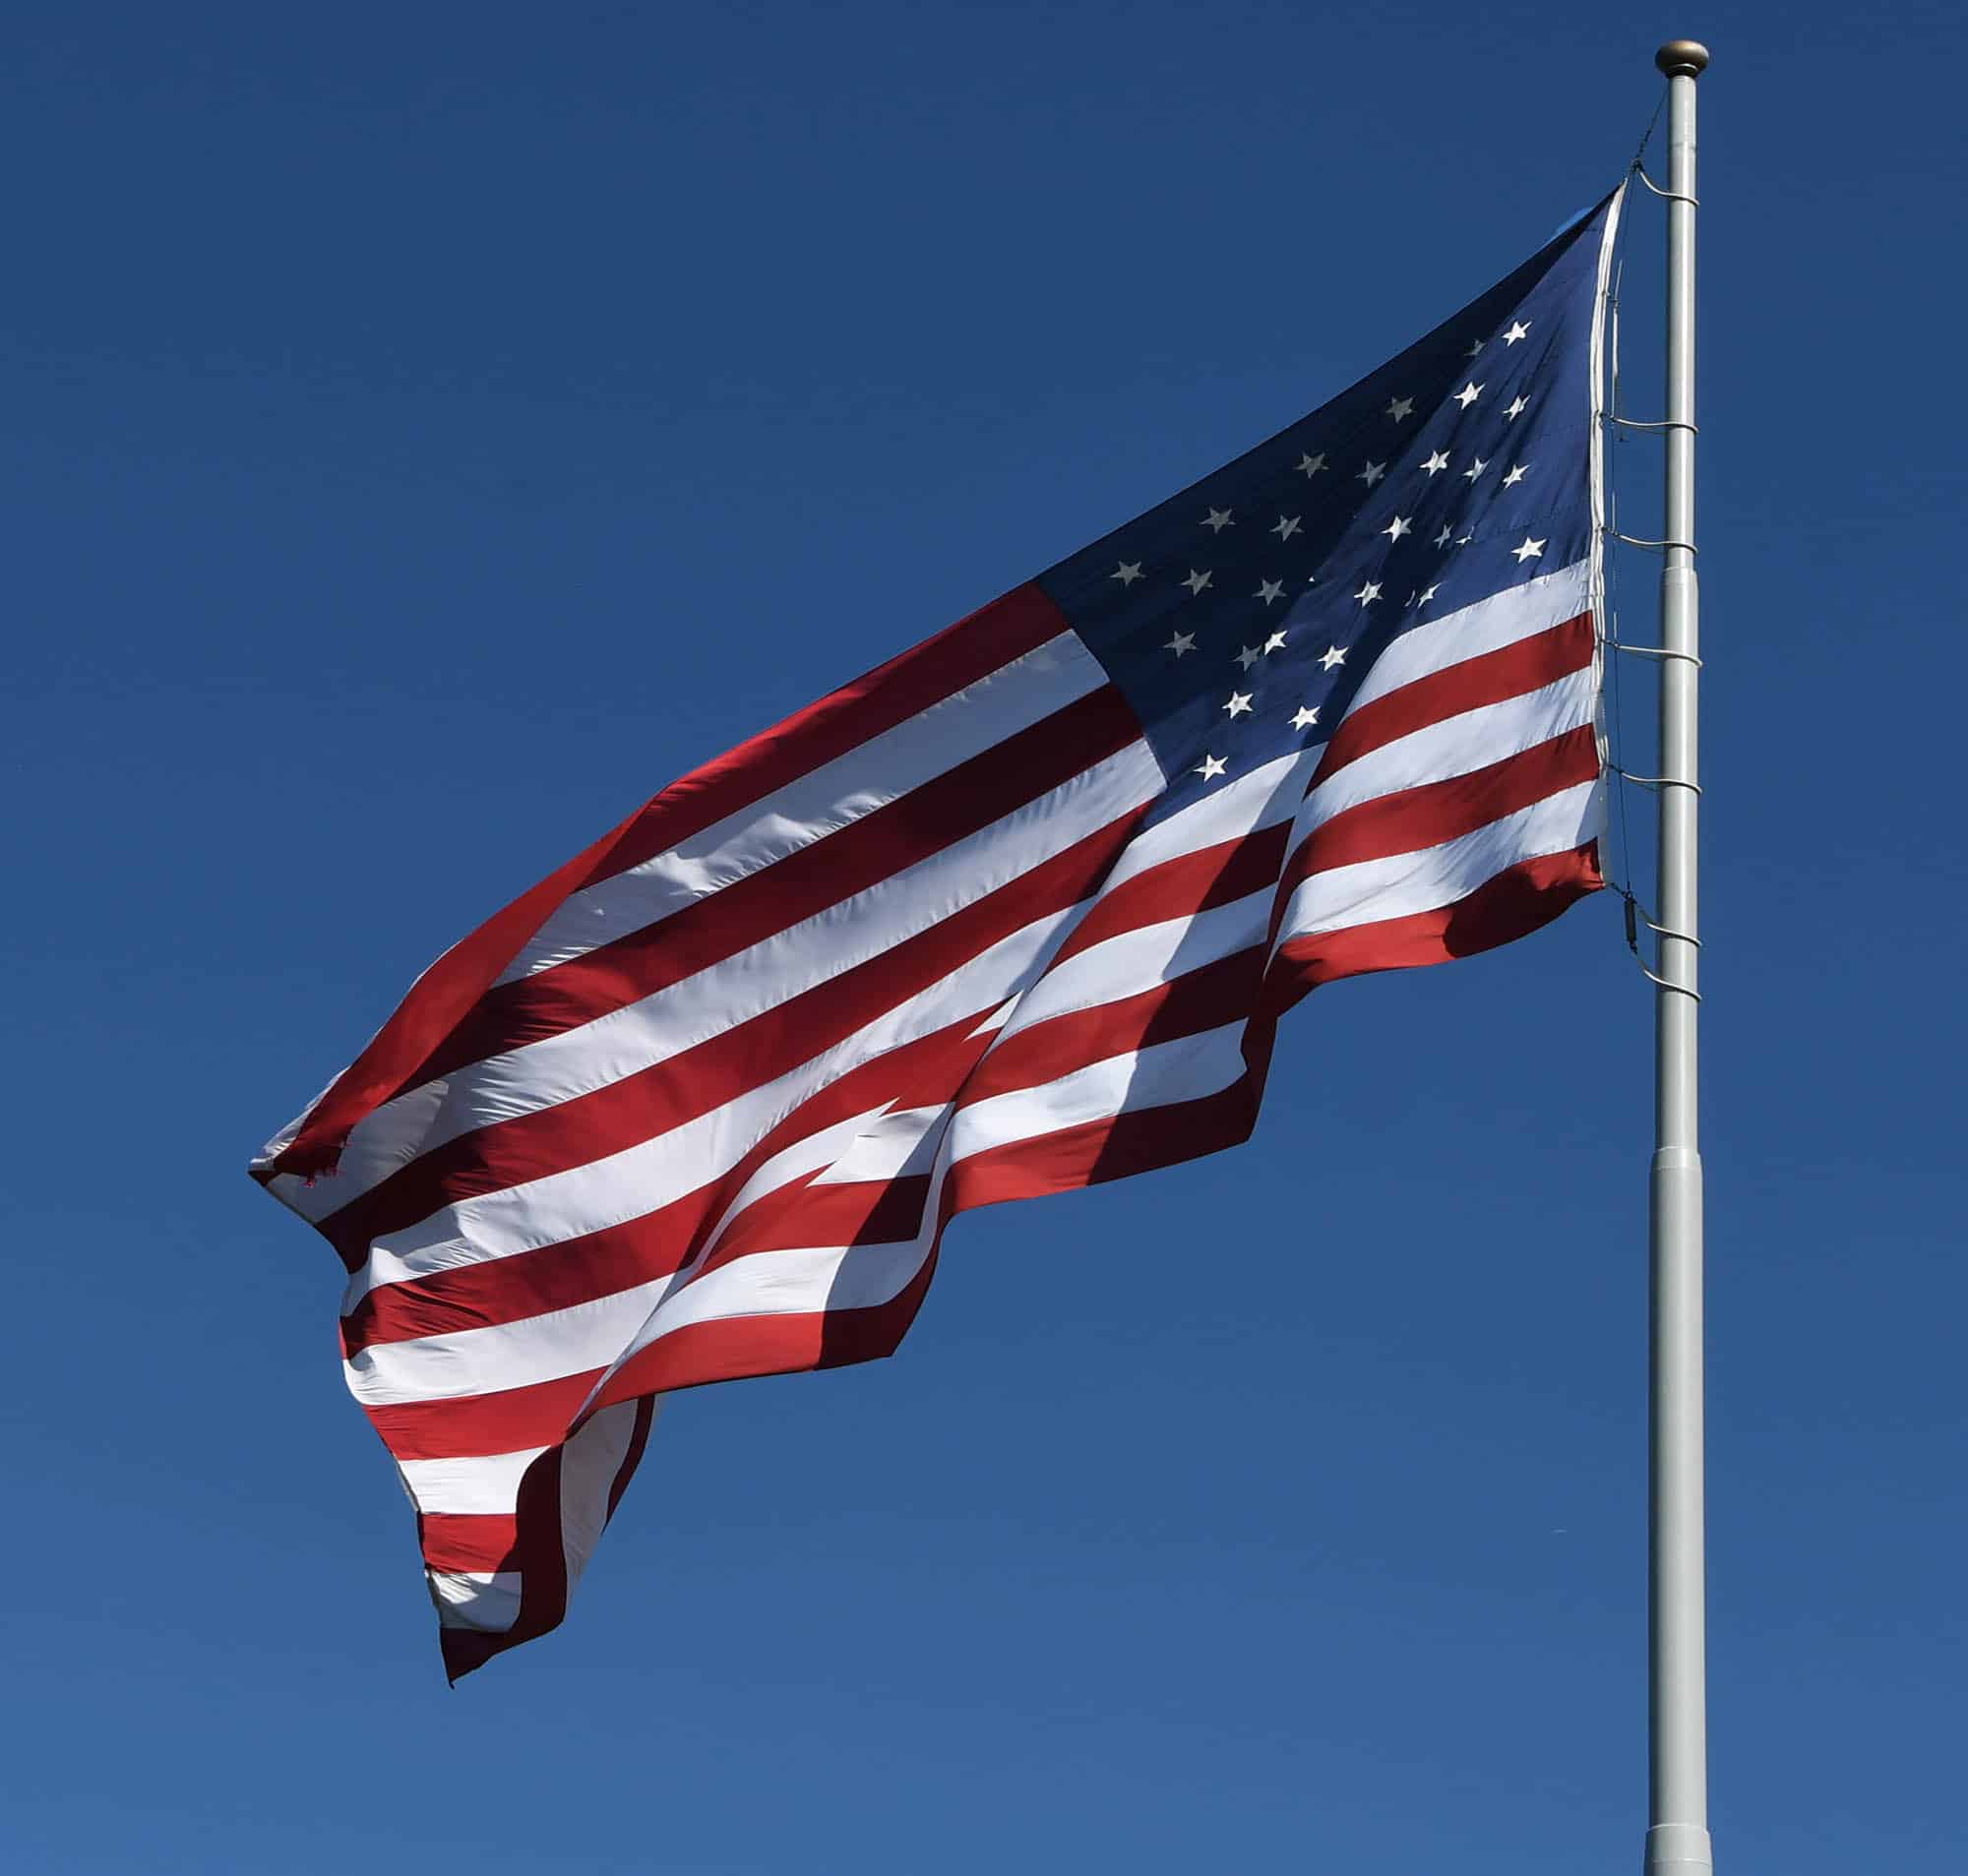 US flag, claimed proudly by the author of Noble